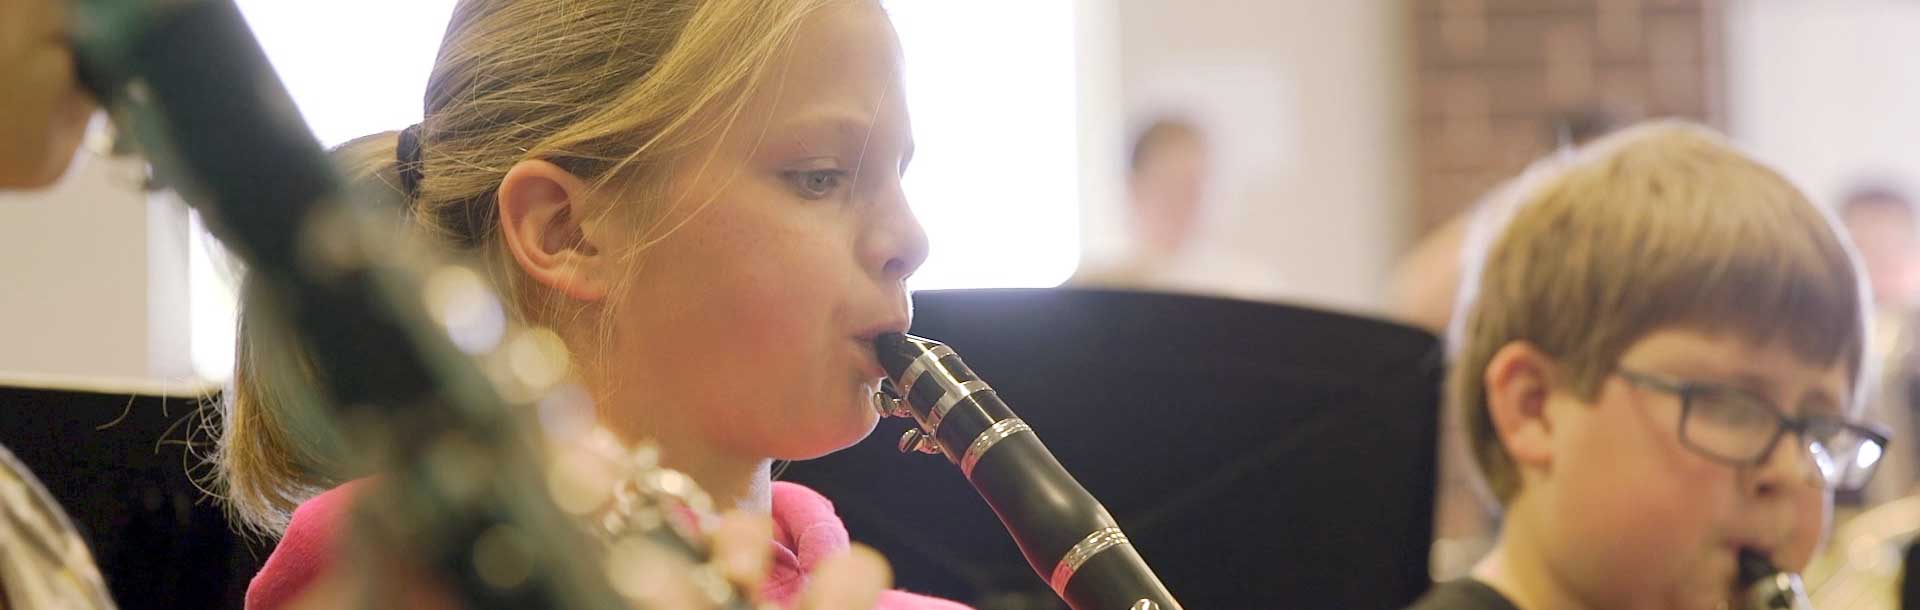 Student Playing Clarinet in Band Class